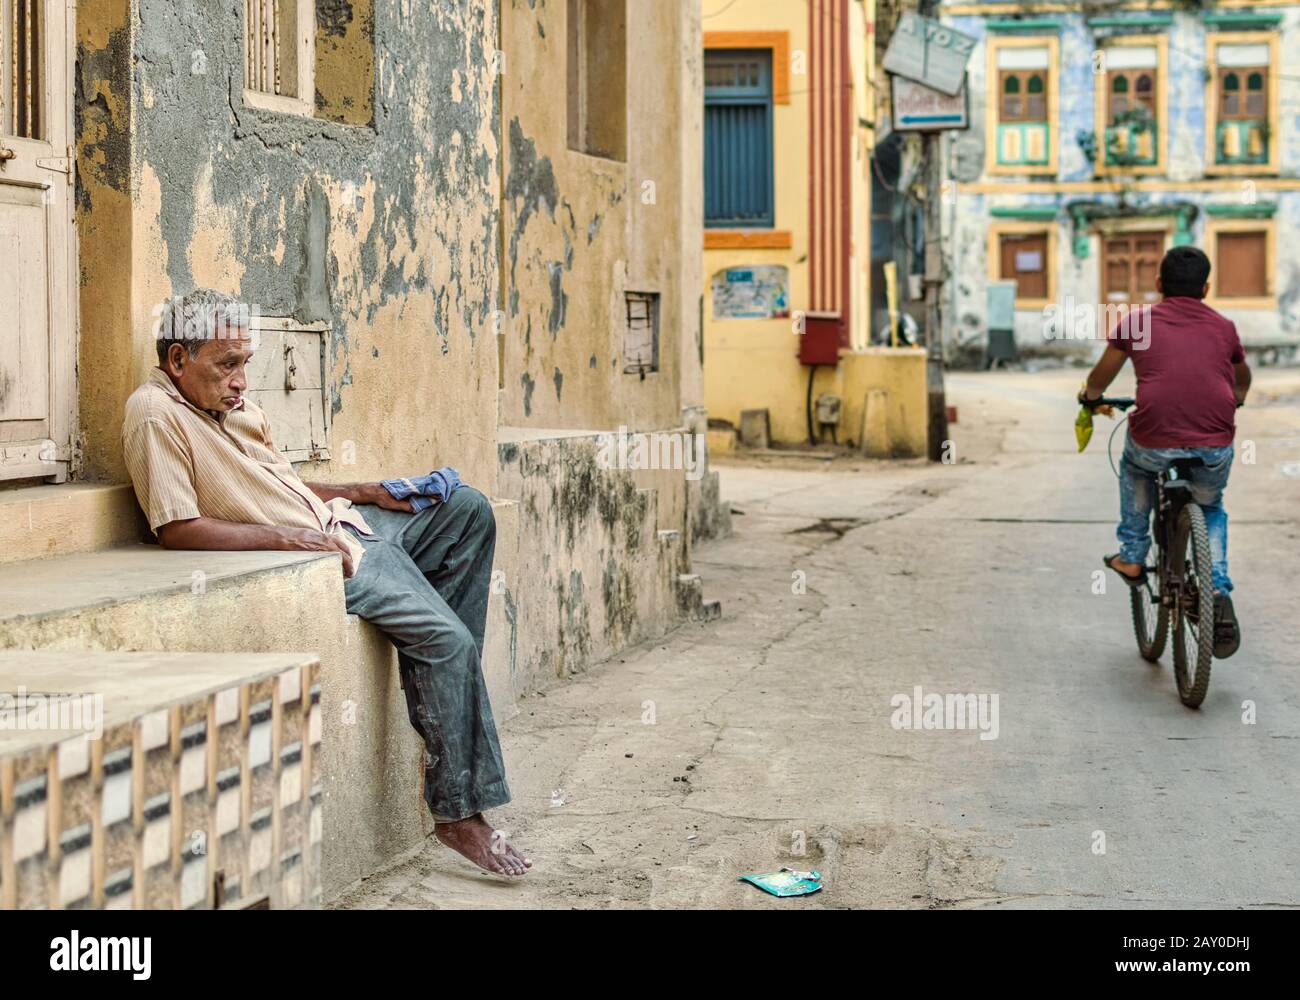 Diu, India - December 2018: An old man sits in a slumping posture outside a house on the quiet streets of the island of Diu. Stock Photo